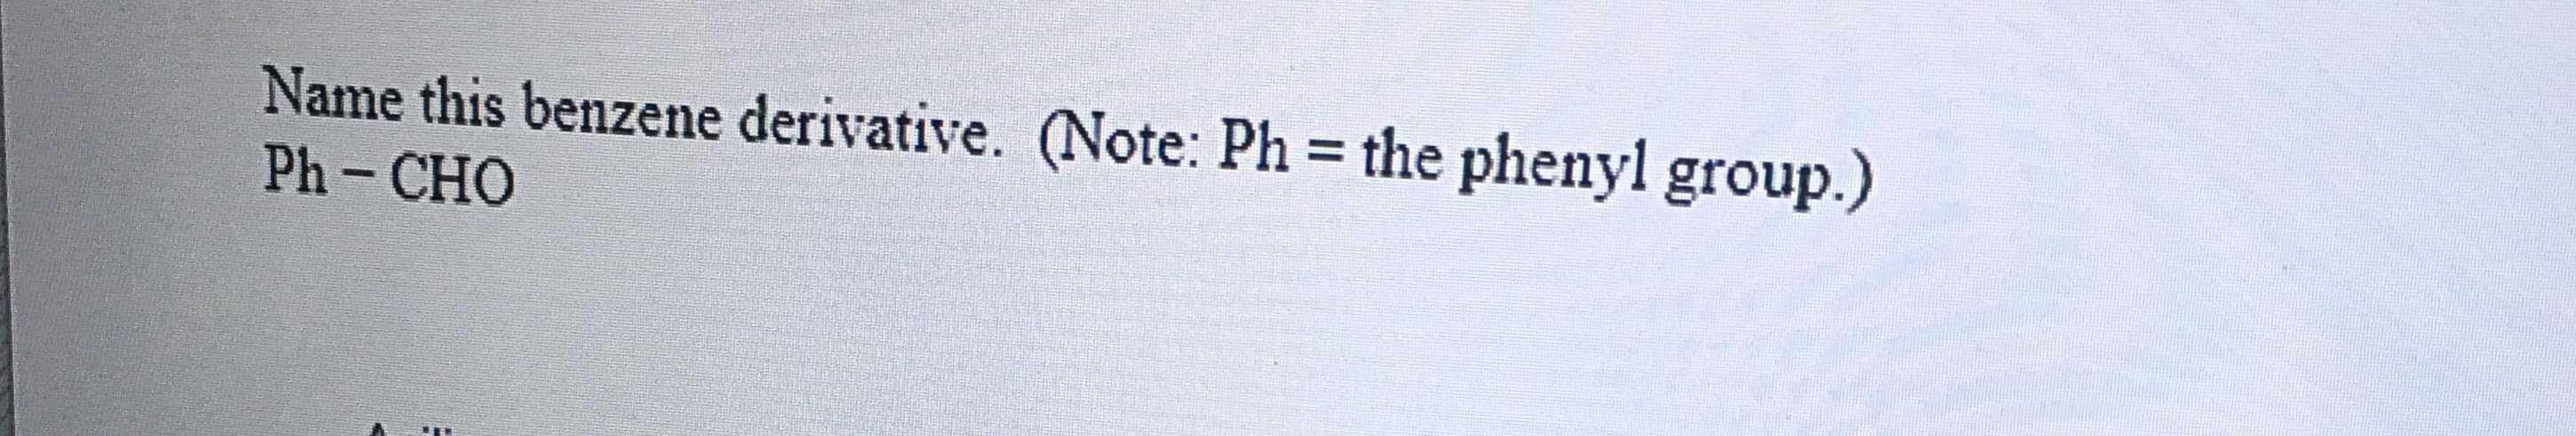 Name this benzene derivative. (Note: Ph = the phenyl group.)
Ph- CHO
